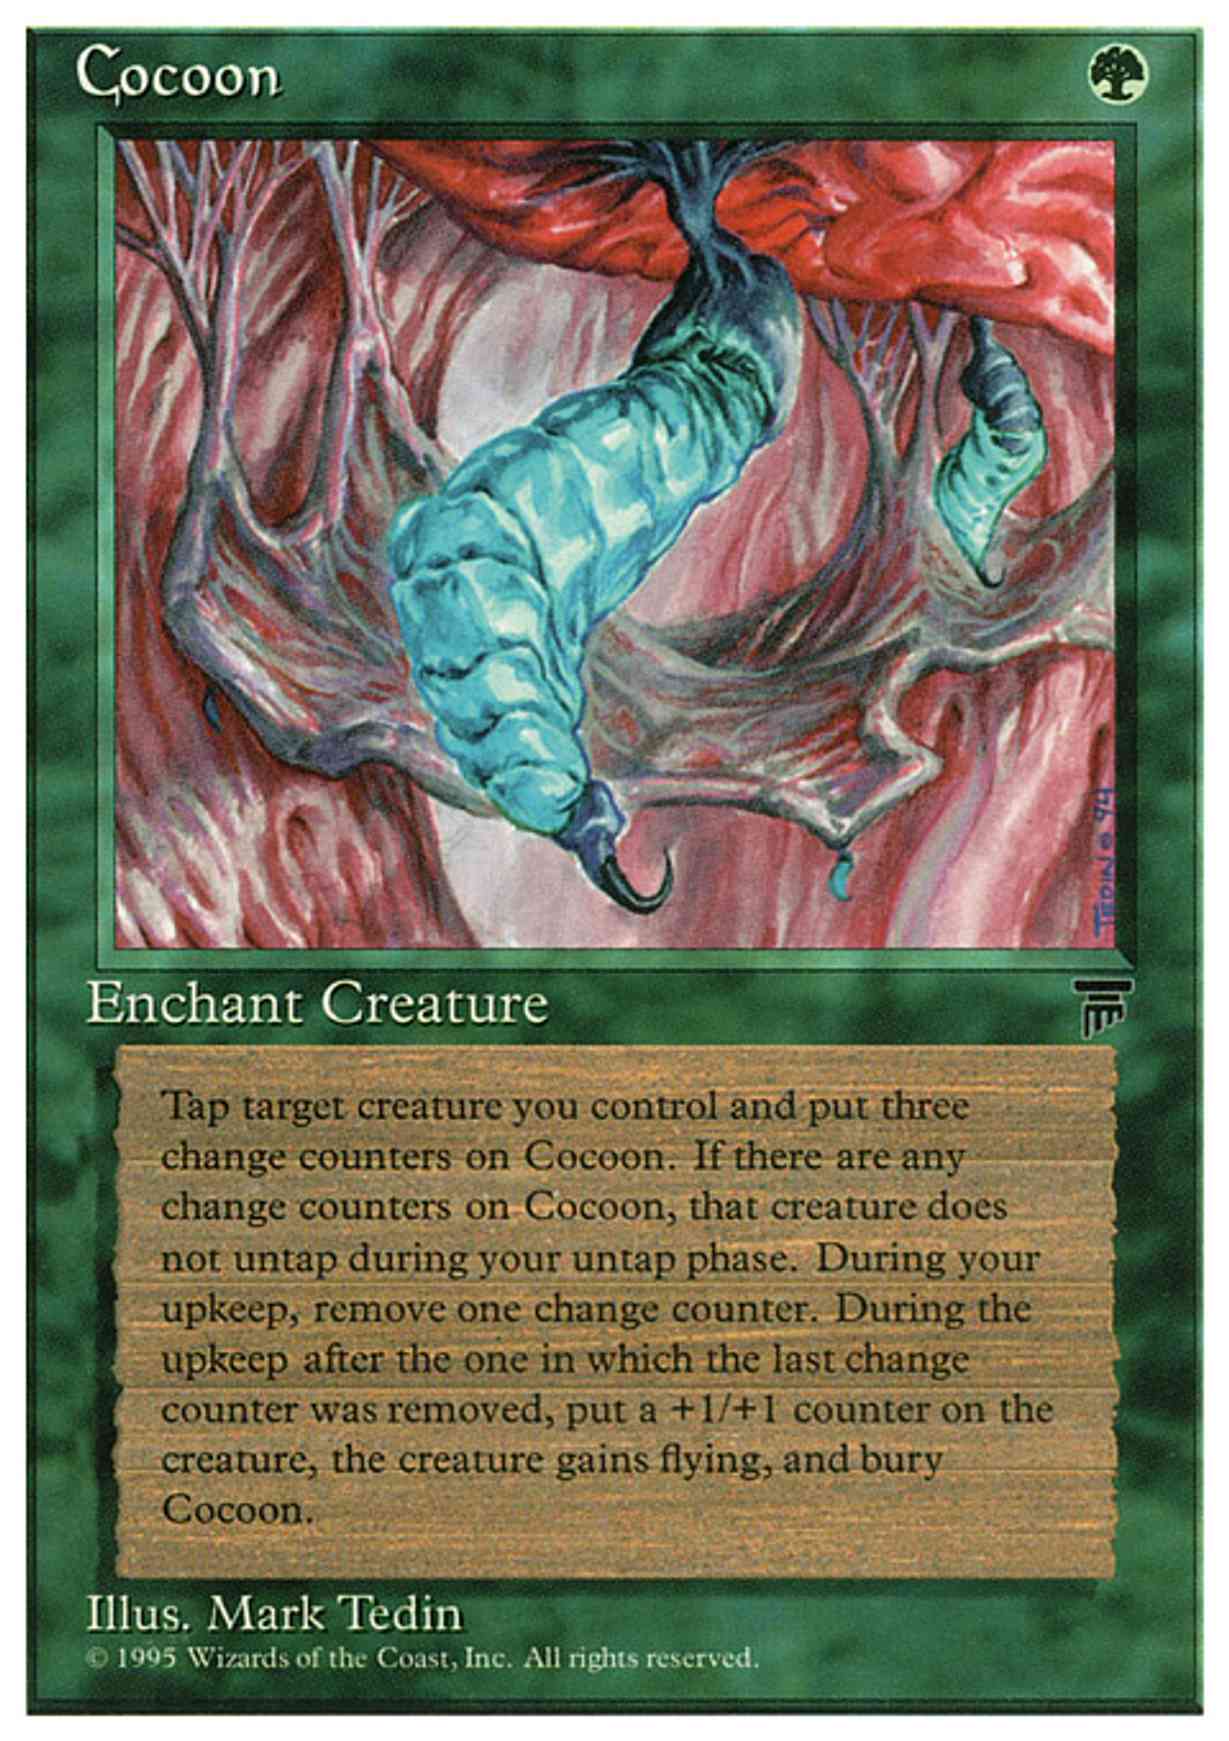 Cocoon magic card front